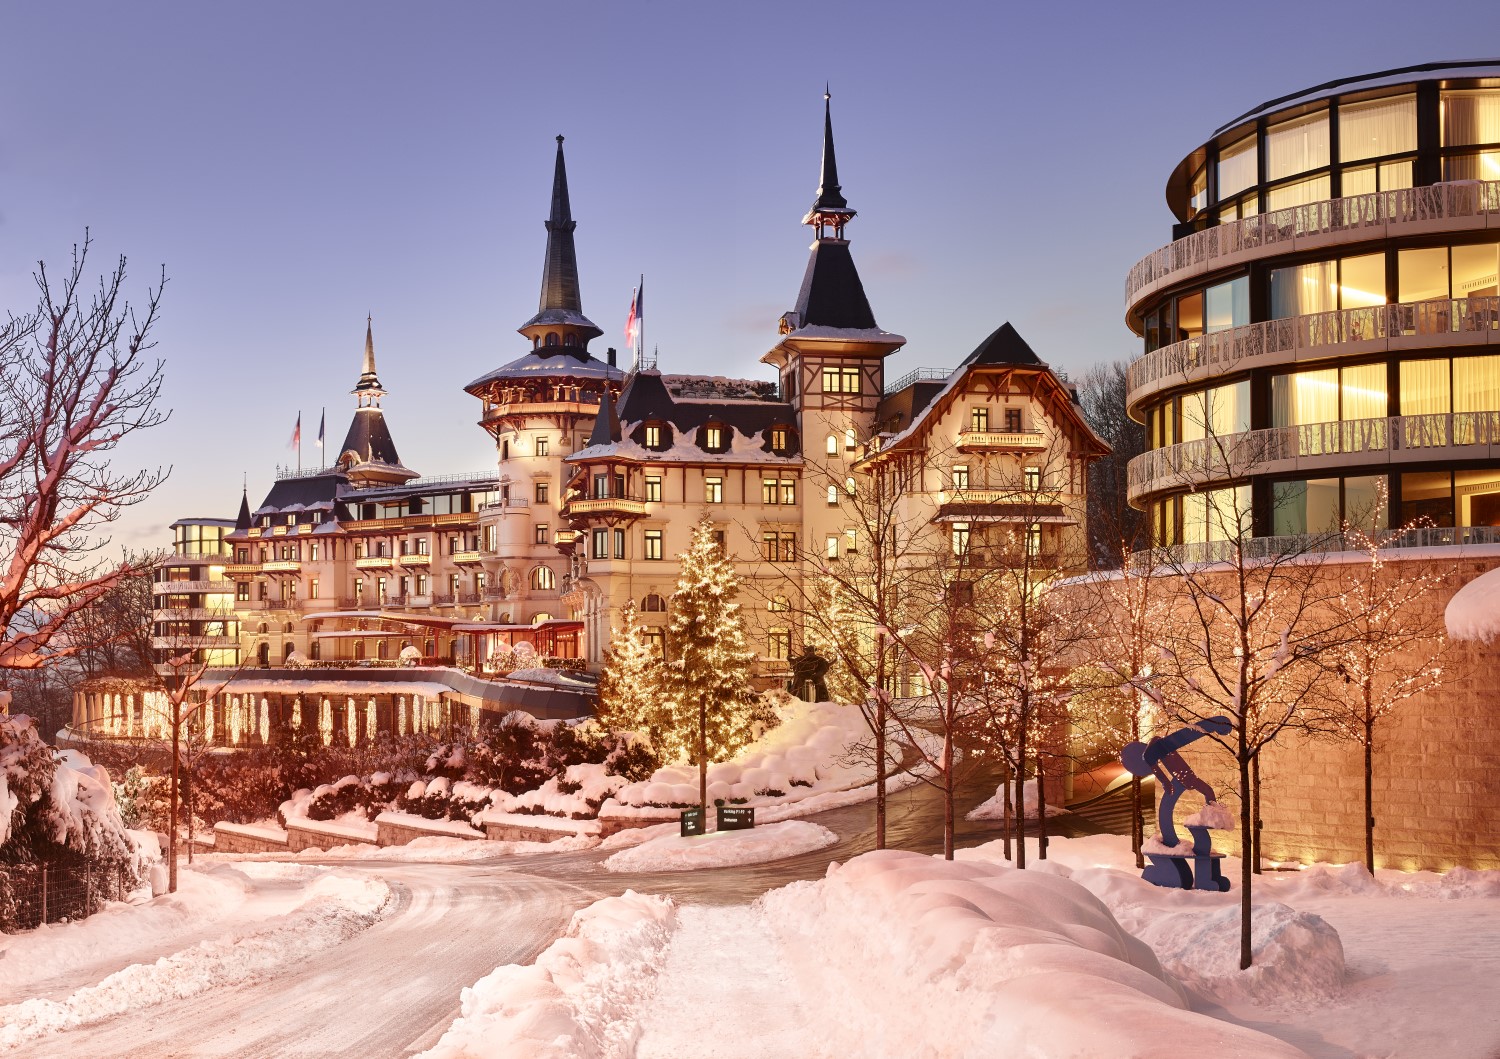 5-Star Swiss Hotel Set To Accept Bitcoin Payments